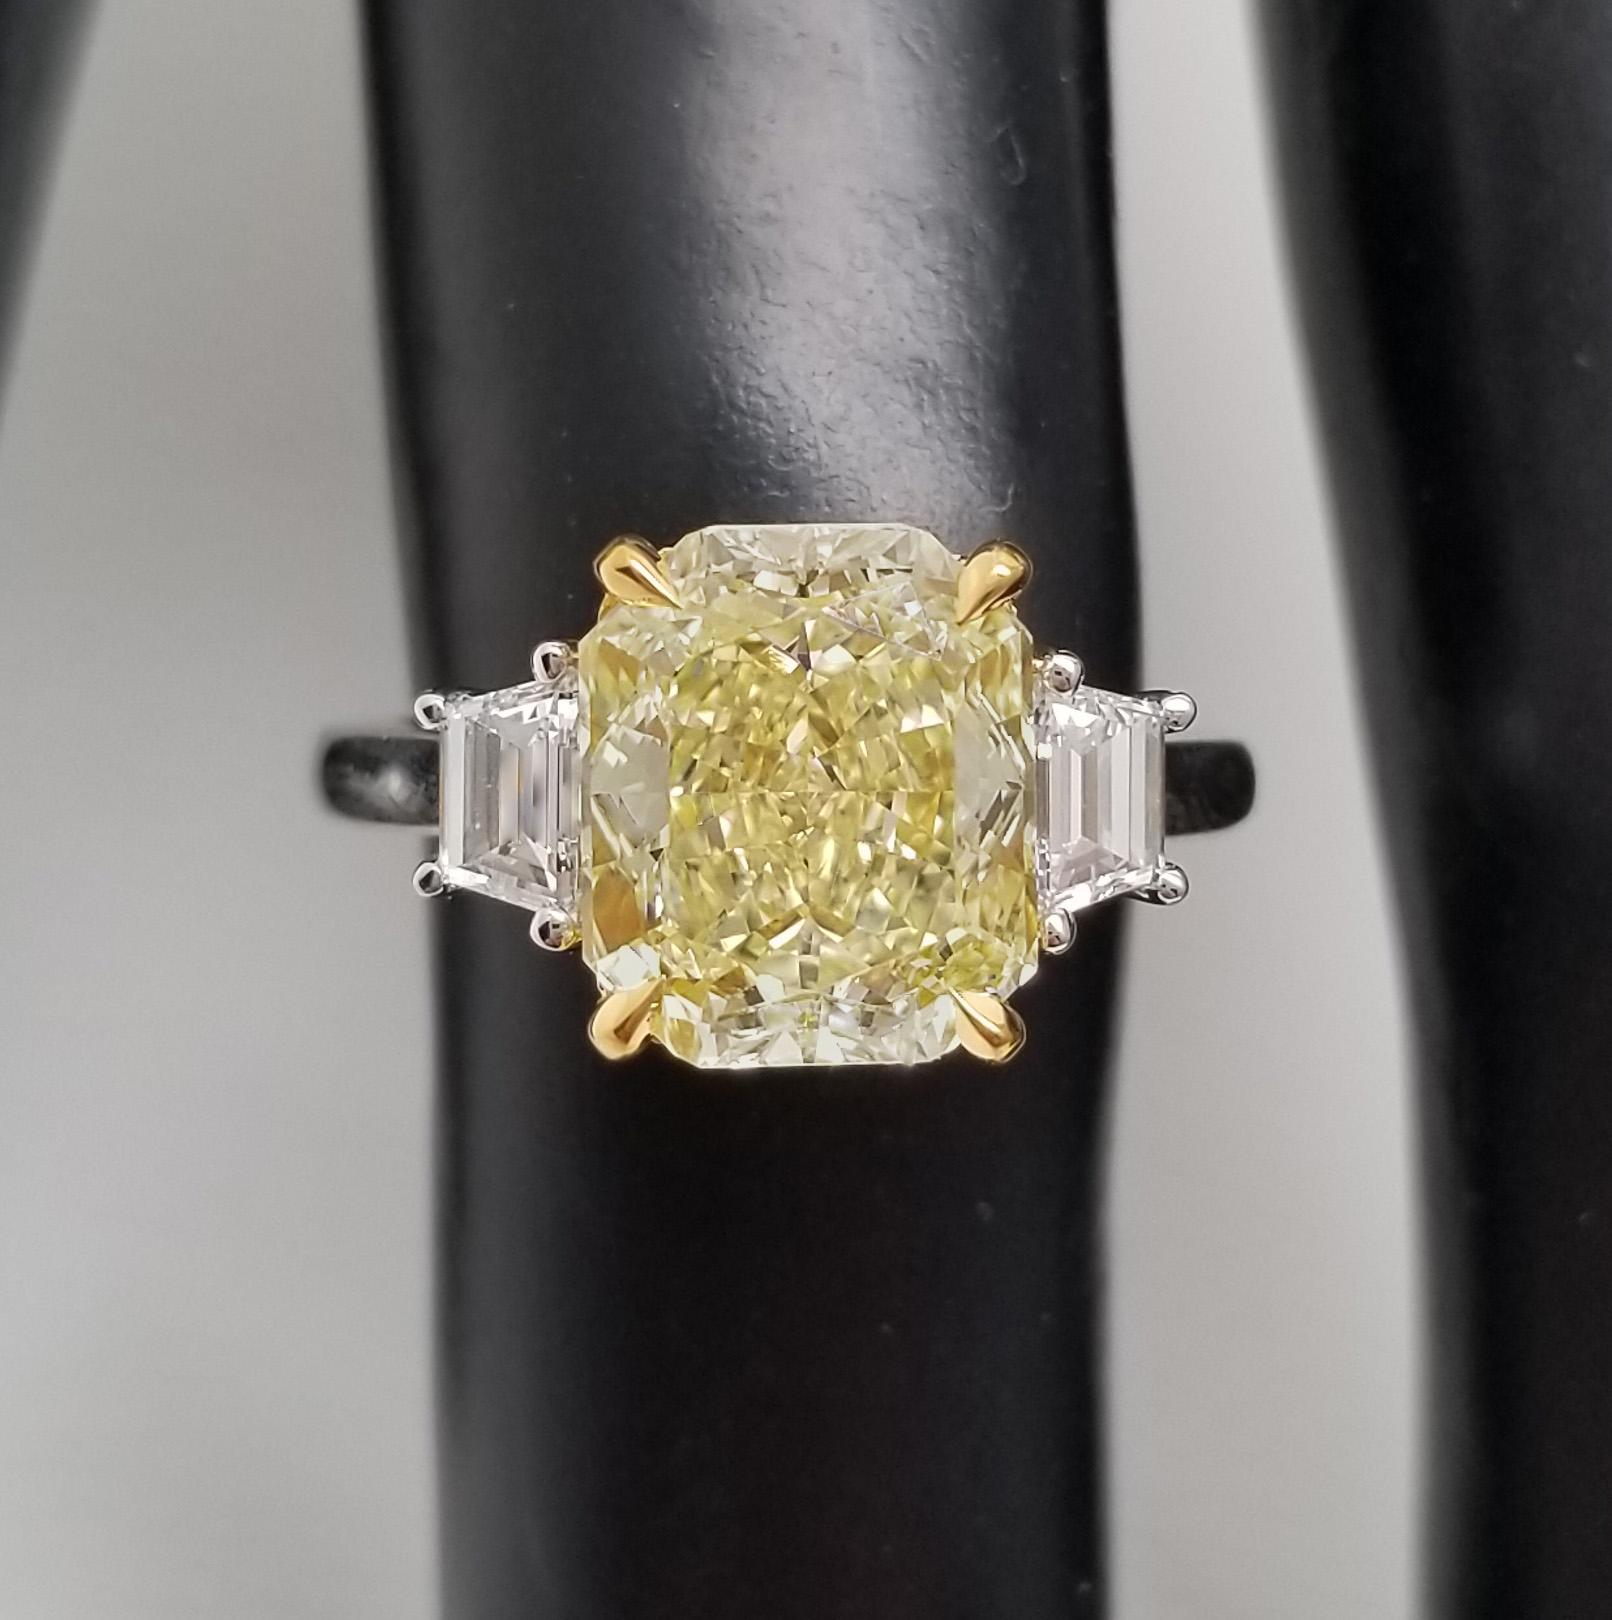 Engagement ring from Scarselli Diamonds with internally flawless, 3.57 carat radiant cut natural fancy yellow color center stone. Three-stone style engagement with 3.57 carat center stone - internally flawless natural fancy yellow in a radiant cut,